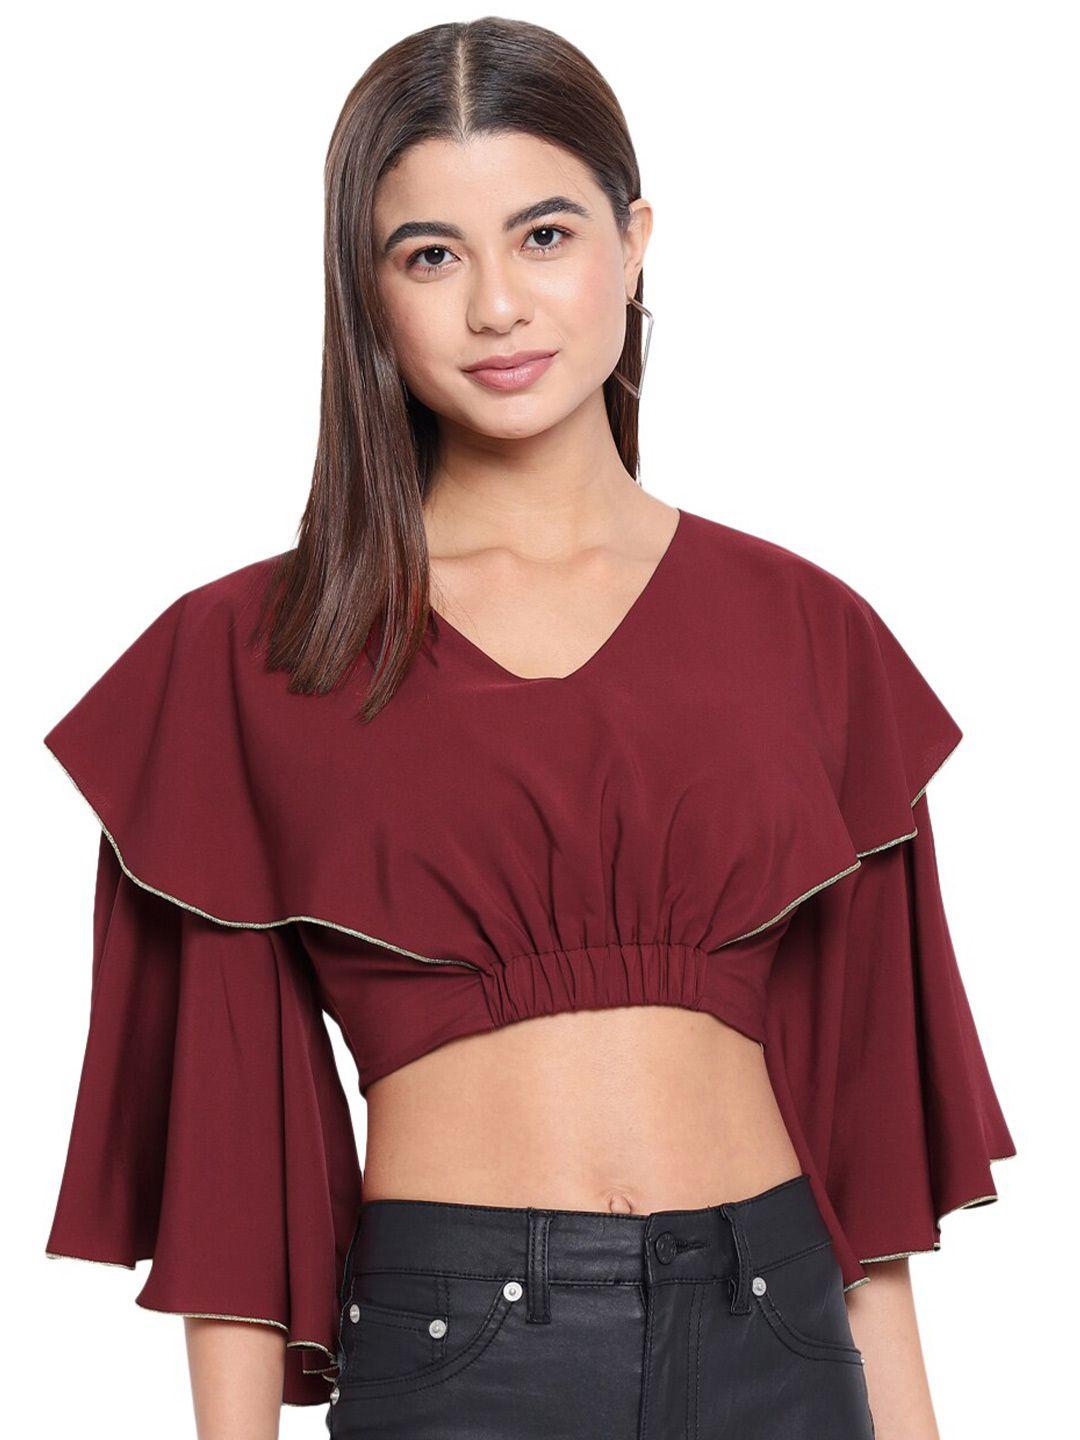 baesd-v-neck-flared-sleeves-crop-top